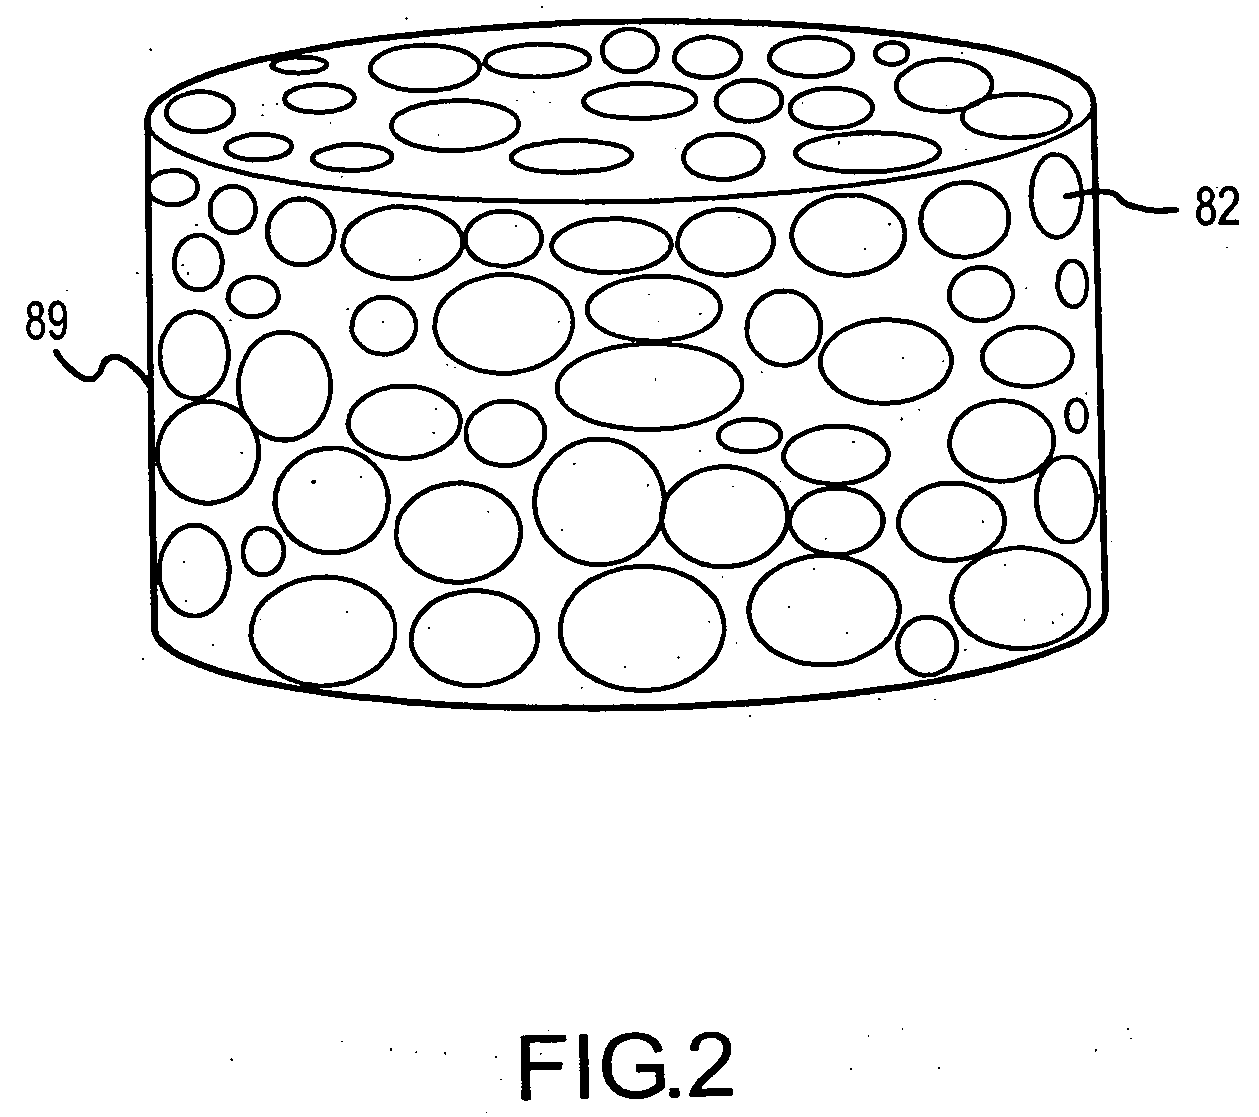 Methods for treating dental conditions using tissue scaffolds